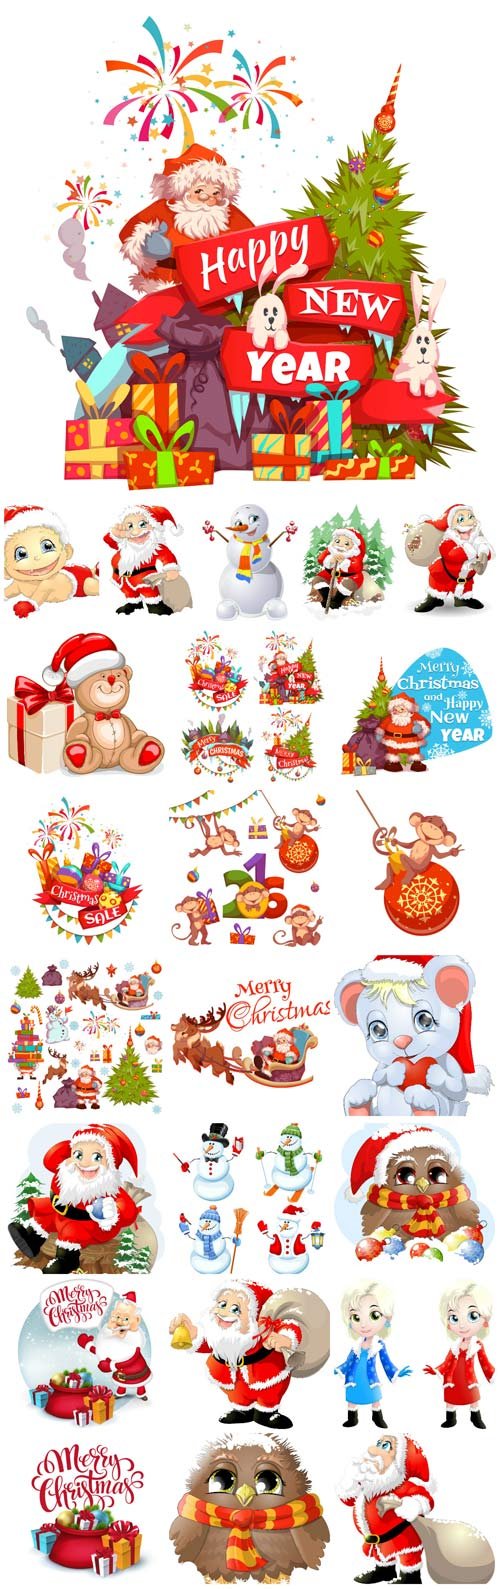 New Year and Christmas illustrations in vector №42